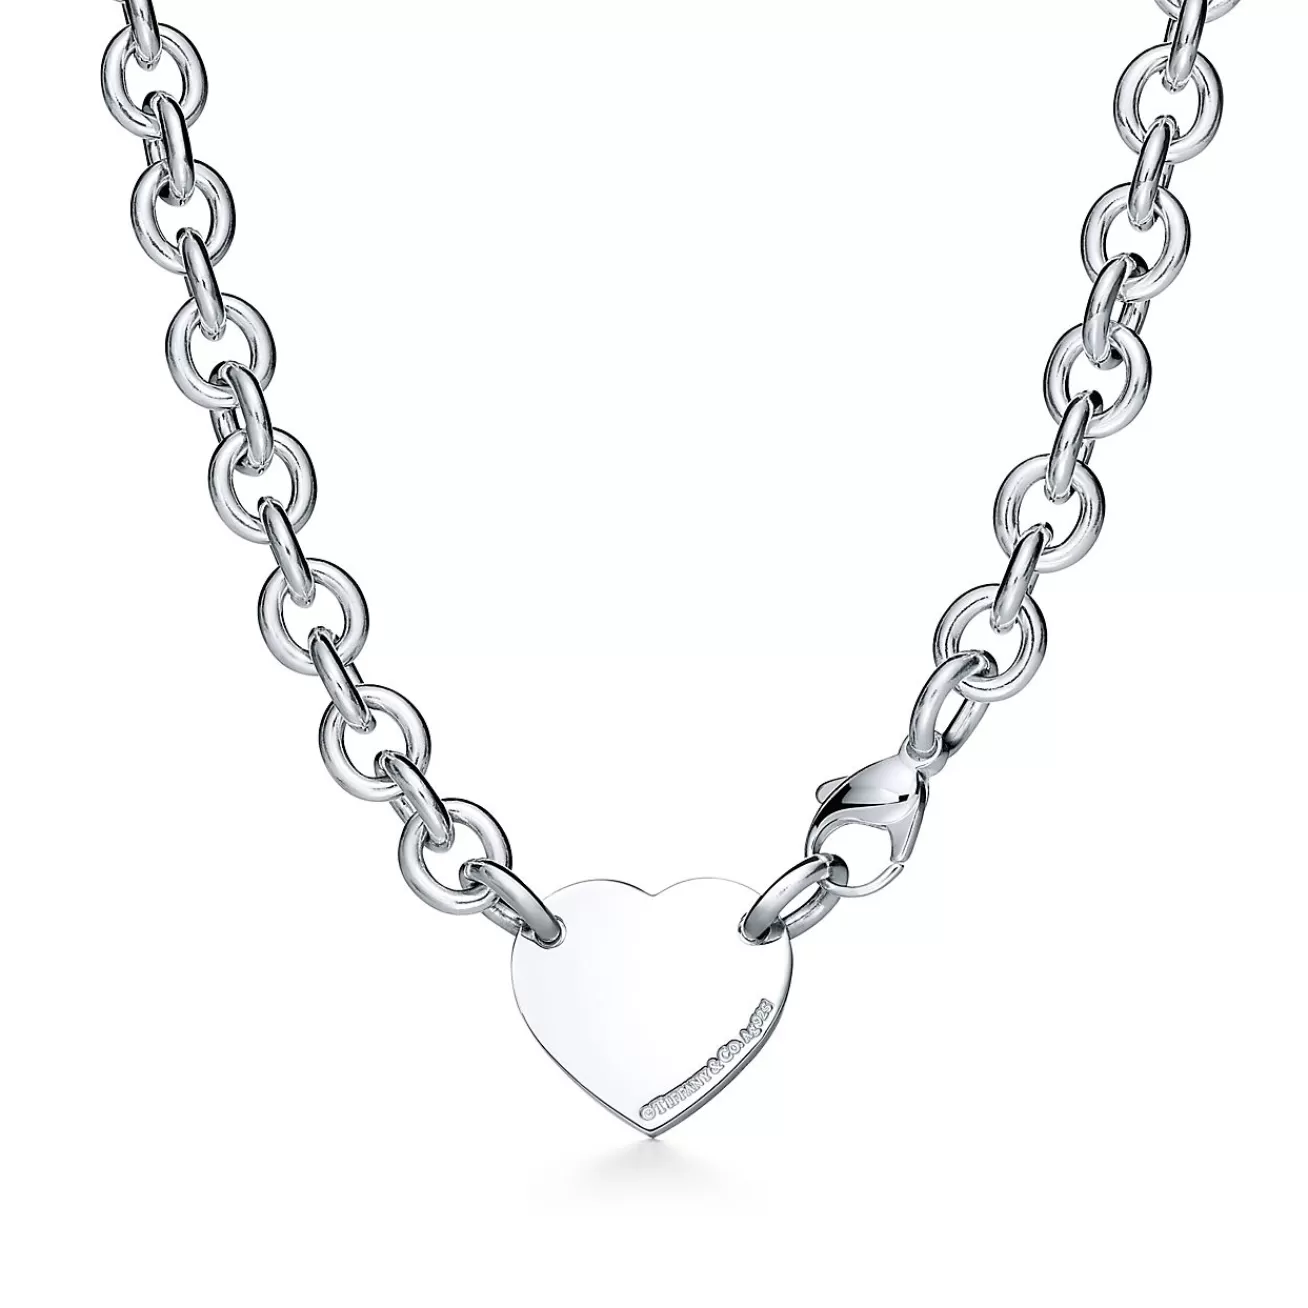 Tiffany & Co. Return to Tiffany® Heart Tag Chain Link Choker in Silver | ^ Necklaces & Pendants | Sterling Silver Jewelry